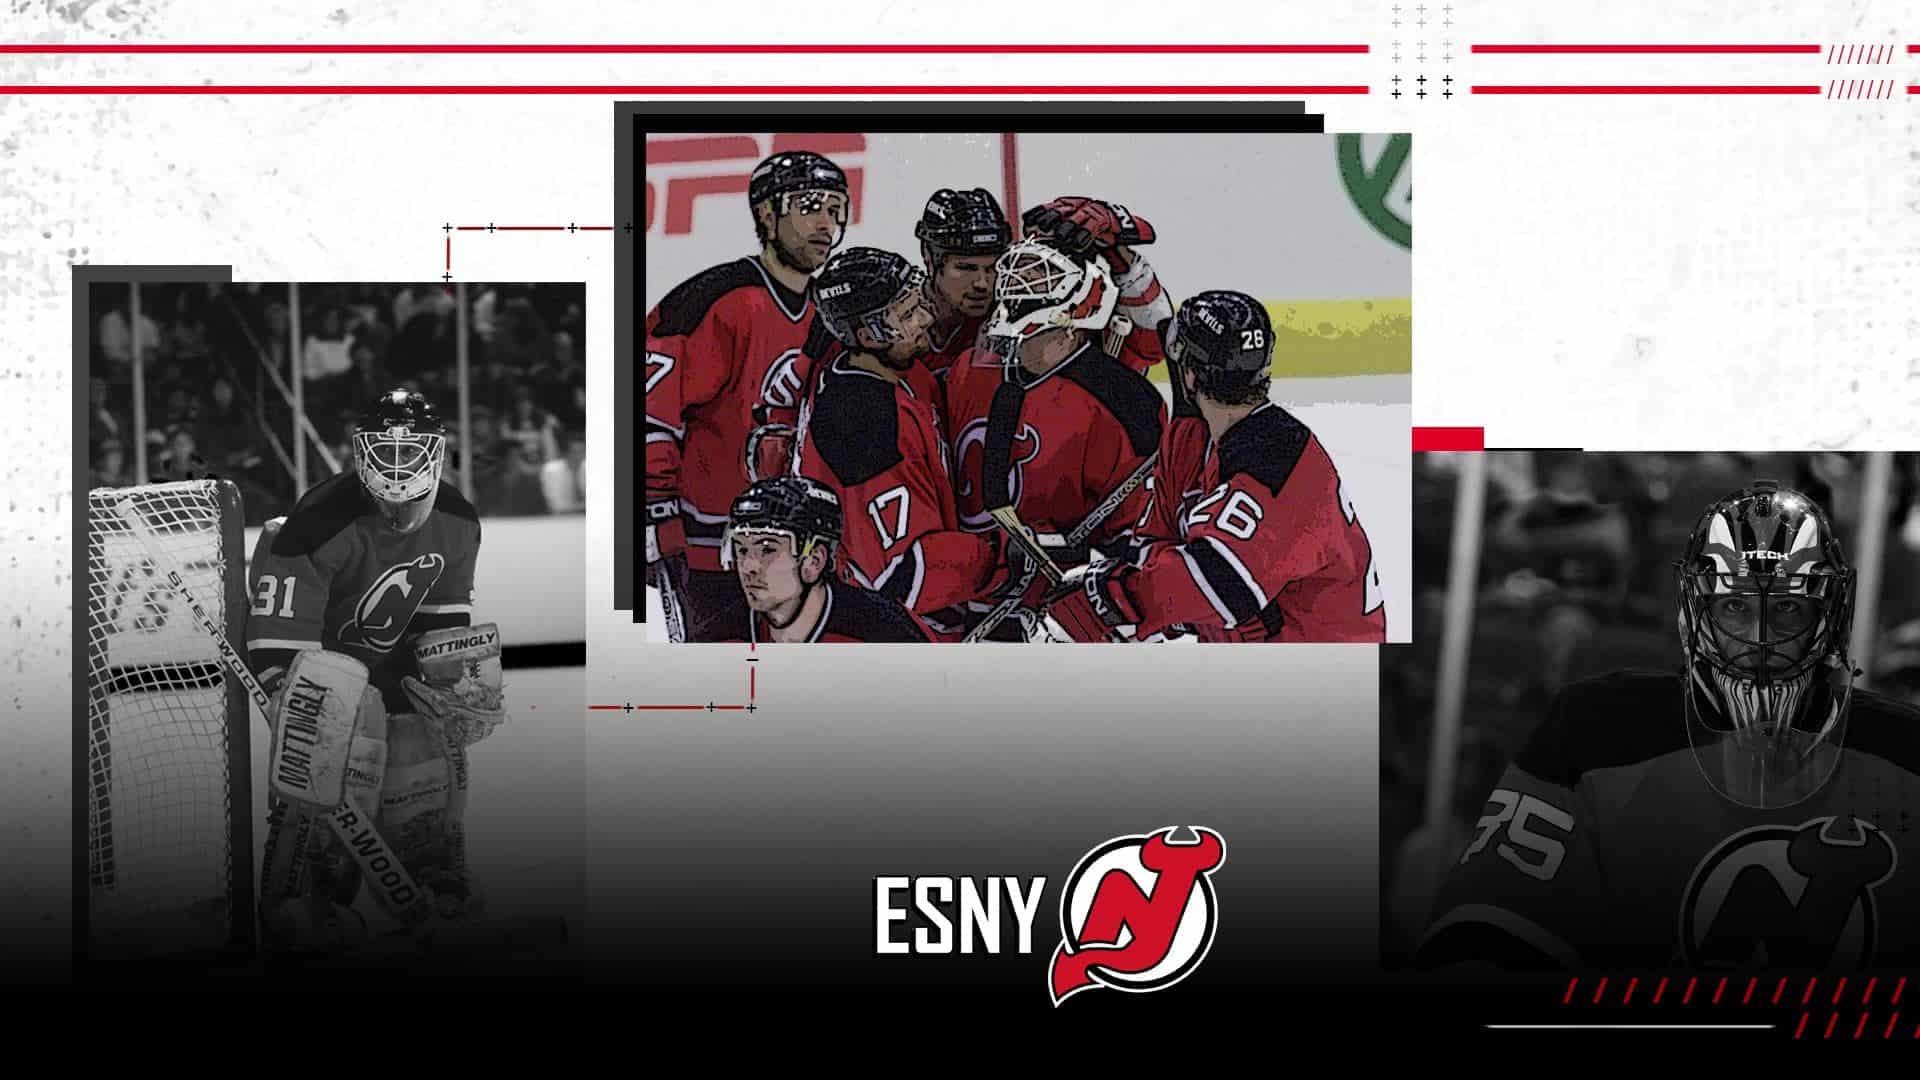 Today in Hockey History: New Jersey Devils Martin Brodeur Retires